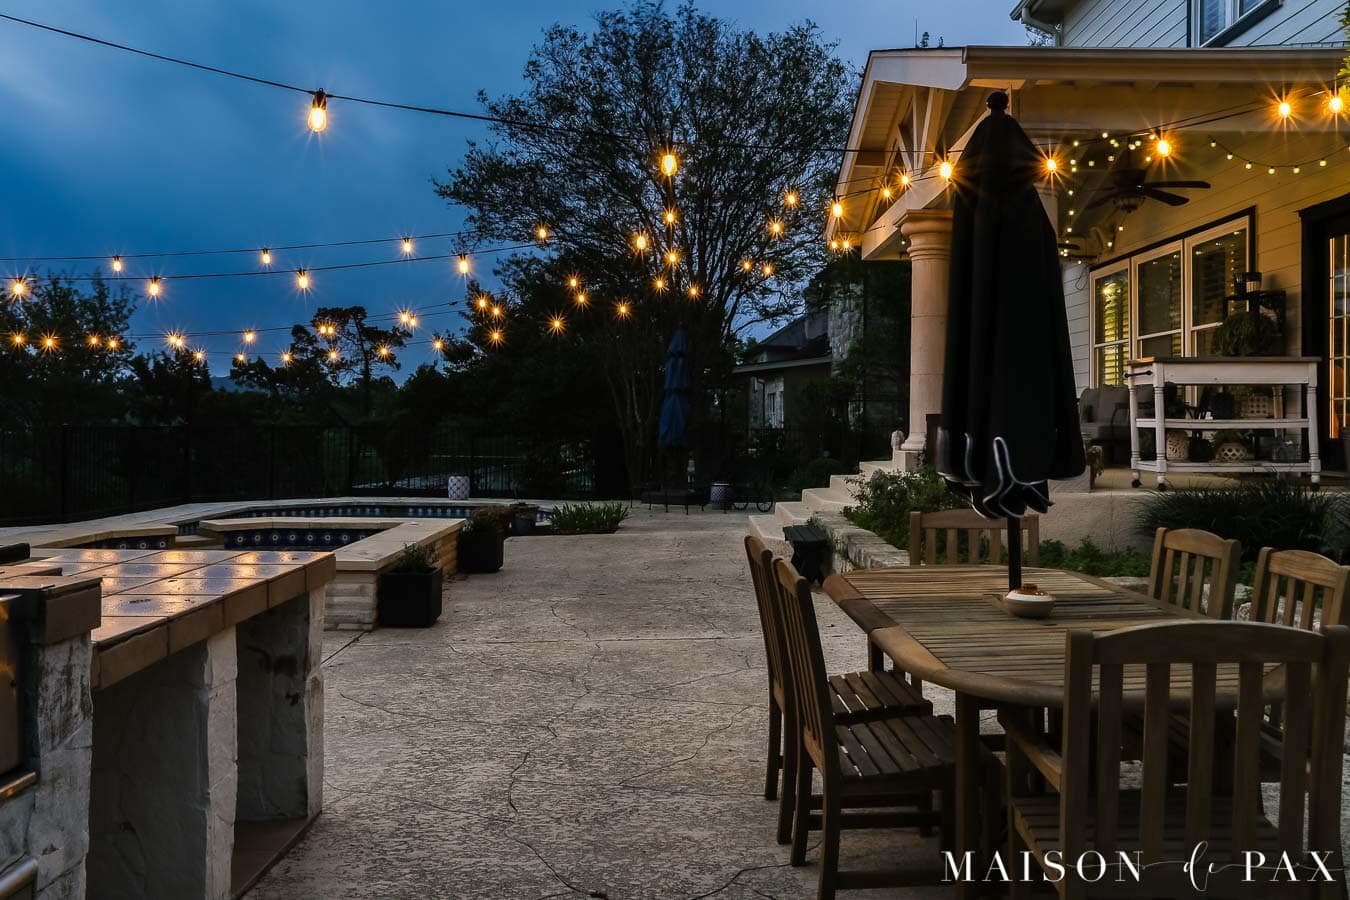 How To Hang Outdoor String Lights Without Trees Maison De Pax